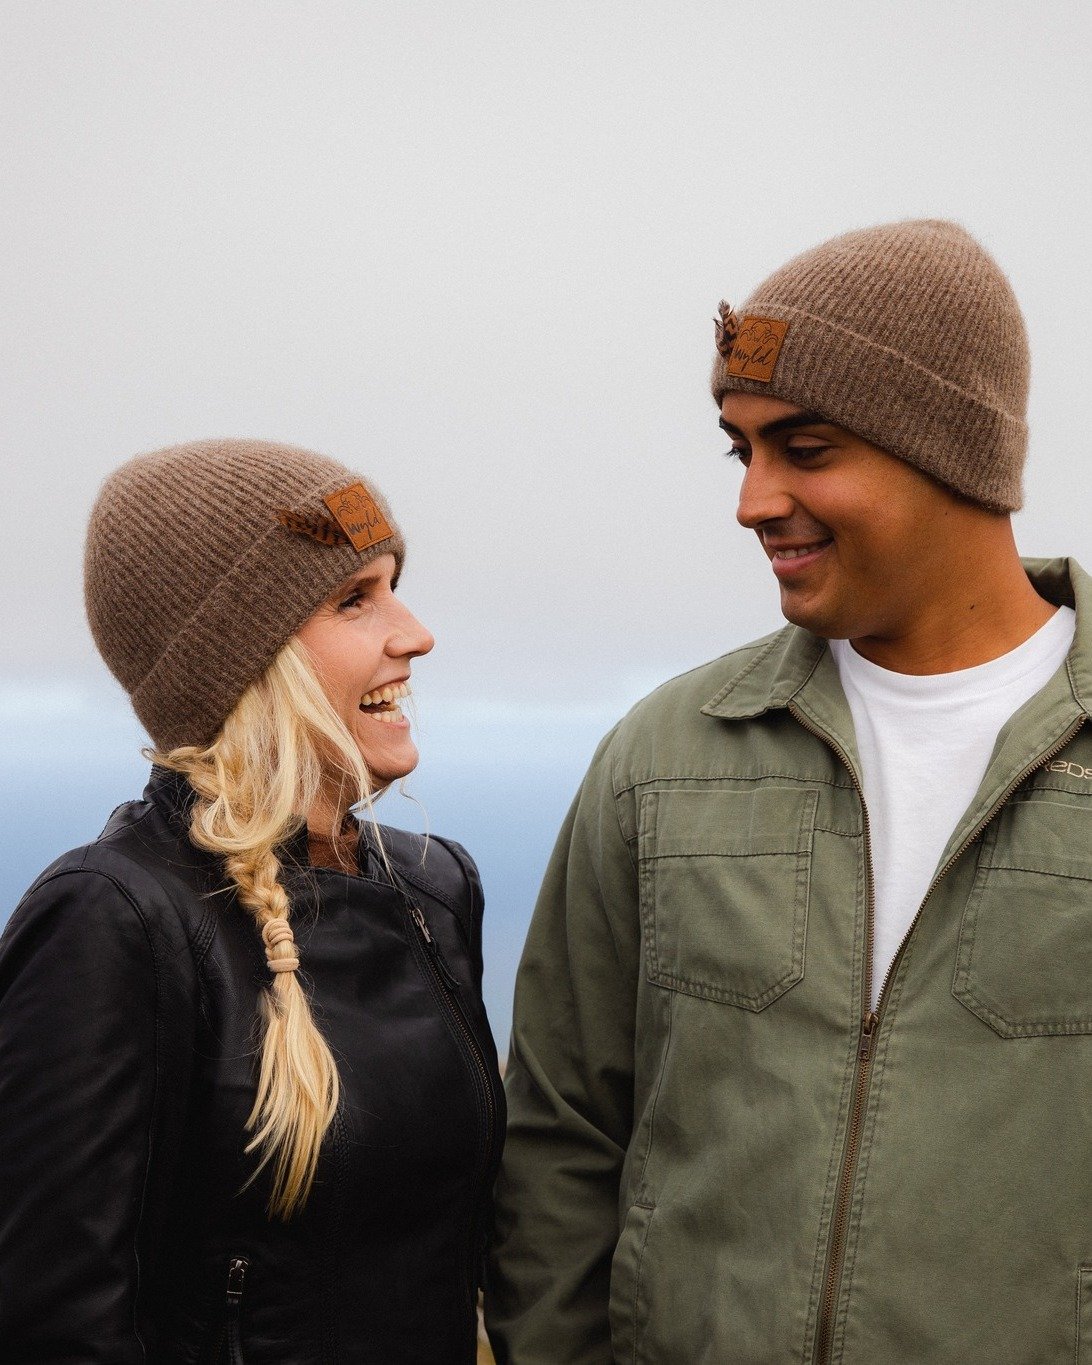 The plan was hats, Beanies to be accurate. 

Did you know the Weka Woo and Wyld Beanie were the founding Wyld products? These have been improved slightly over the last 8 years.

These products exploit the unique properties of the Pitt Island Fleece, 